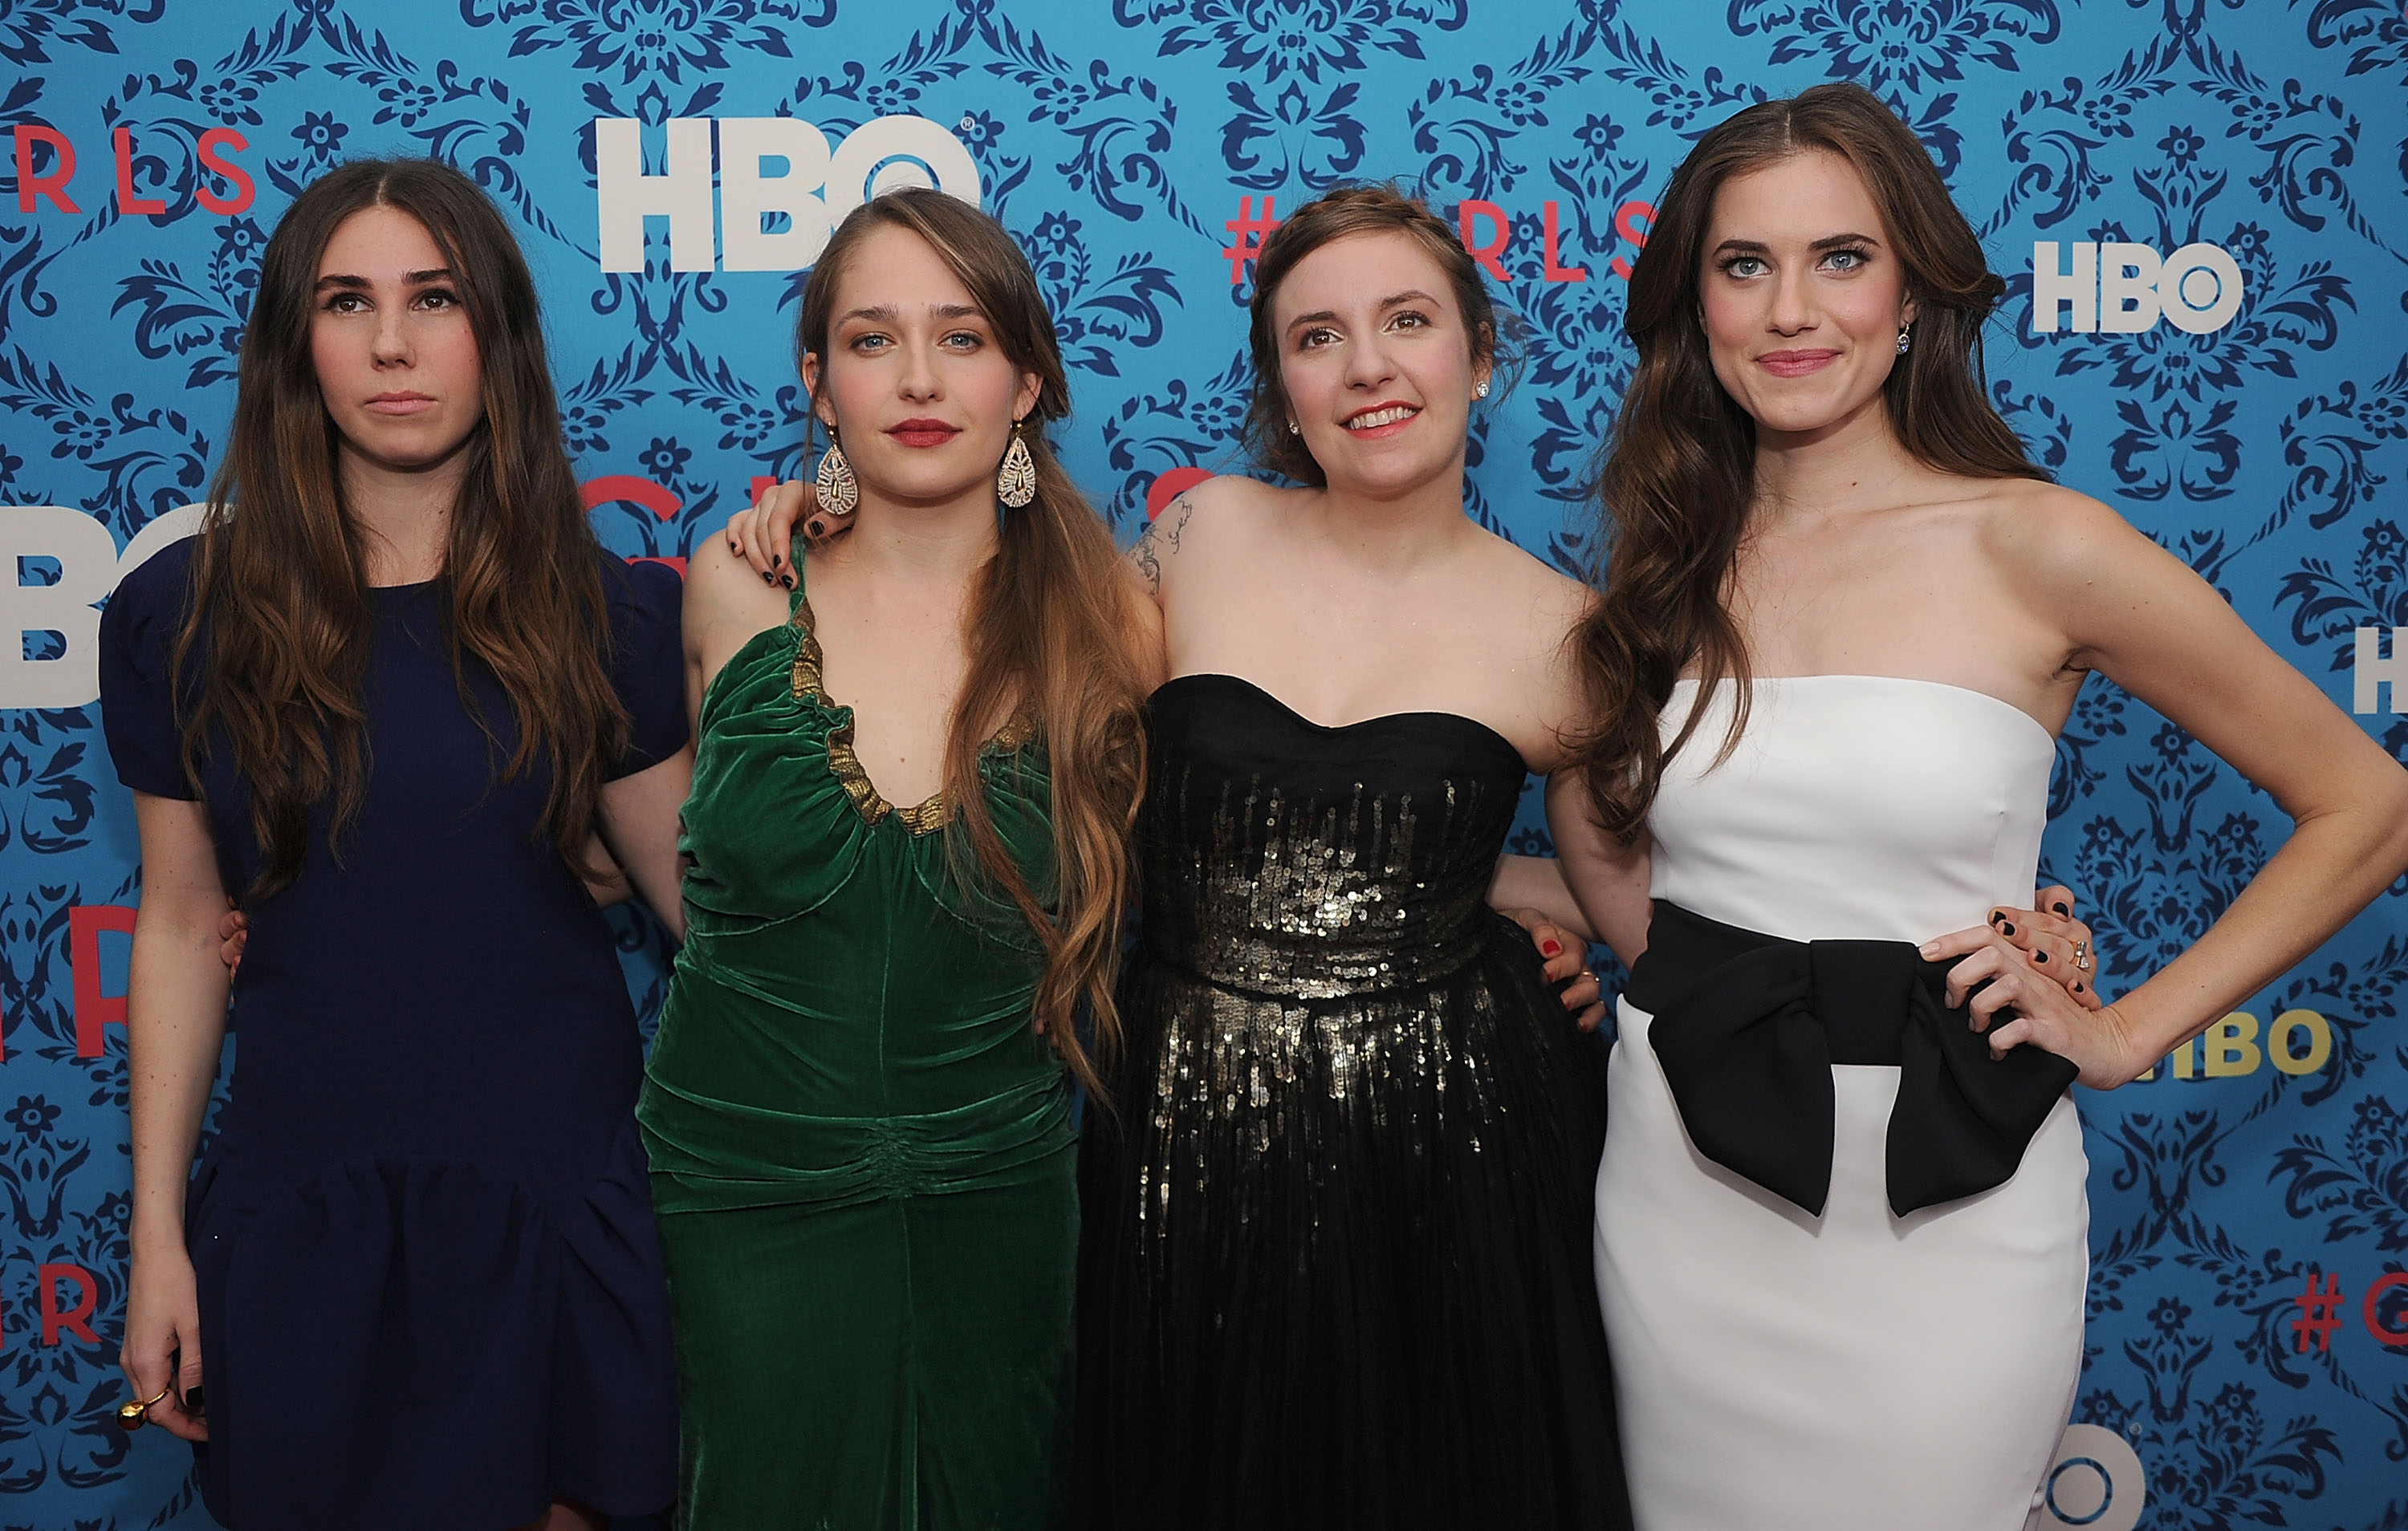 Zosia Mamet, Jemima Kirke, Lena Dunham, and Allison Williams from the cast of the HBO series 'Girls'